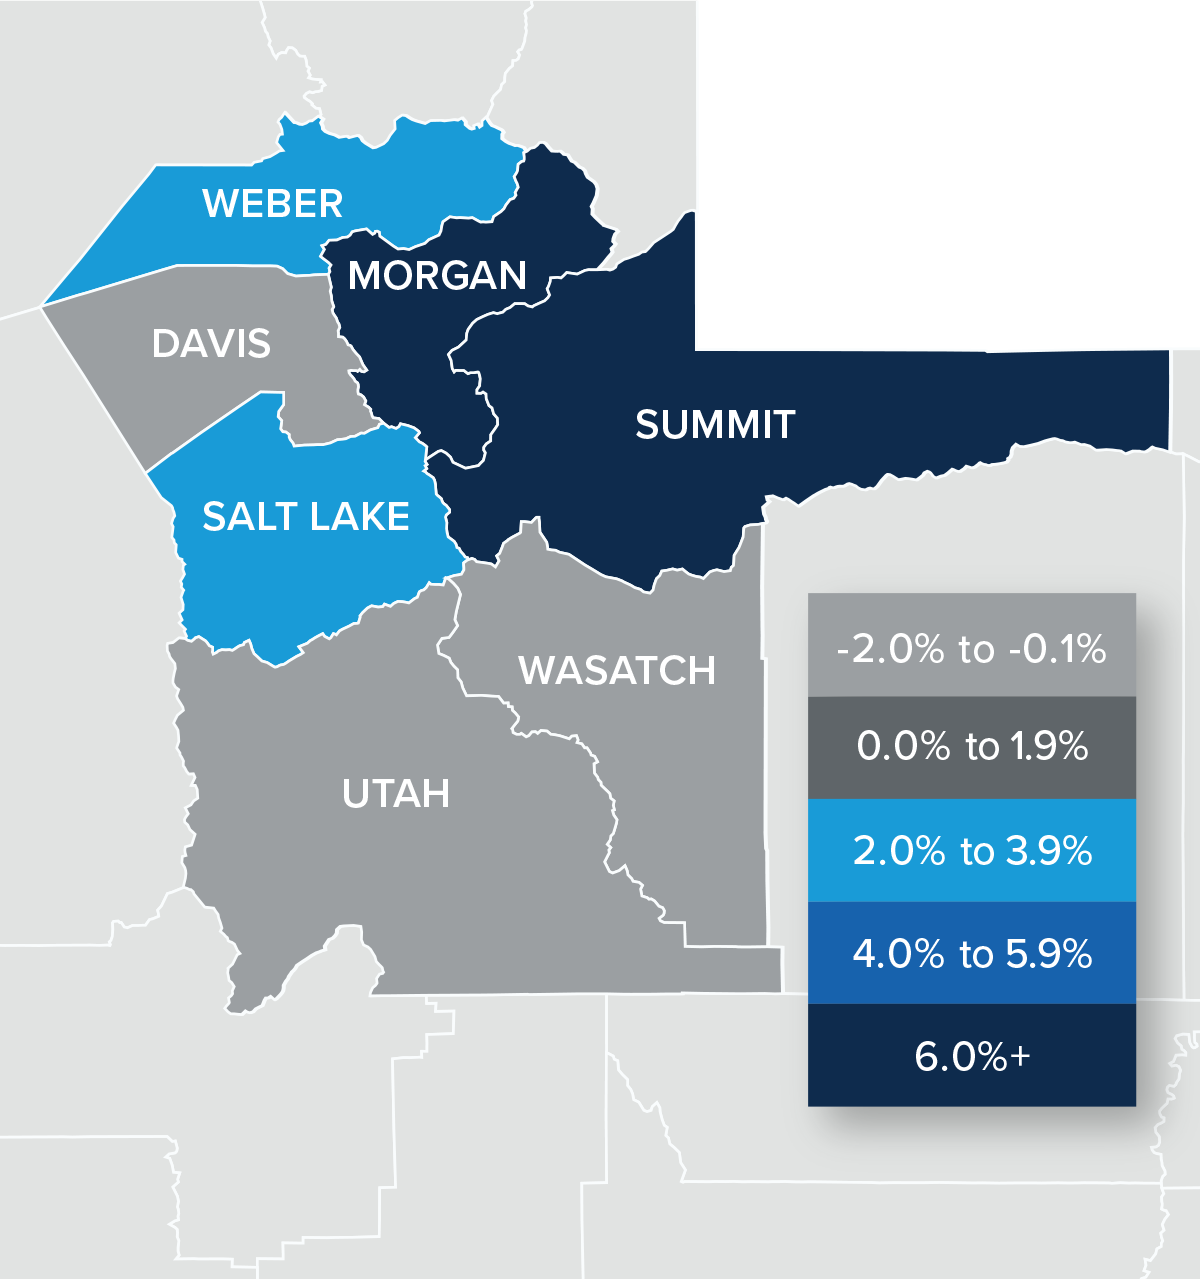 A map showing the real estate home prices percentage changes for various counties in Utah. Different colors correspond to different tiers of percentage change. Morgan and Summit Counties came in above 6% and are represented in the corresponding navy color. Weber and Salt Lake came in the 2 and 3.9% range. Davis, Wasatch, and Utah Counties were in the -0.1% to -2% range and are represented in the light grey color on the map.